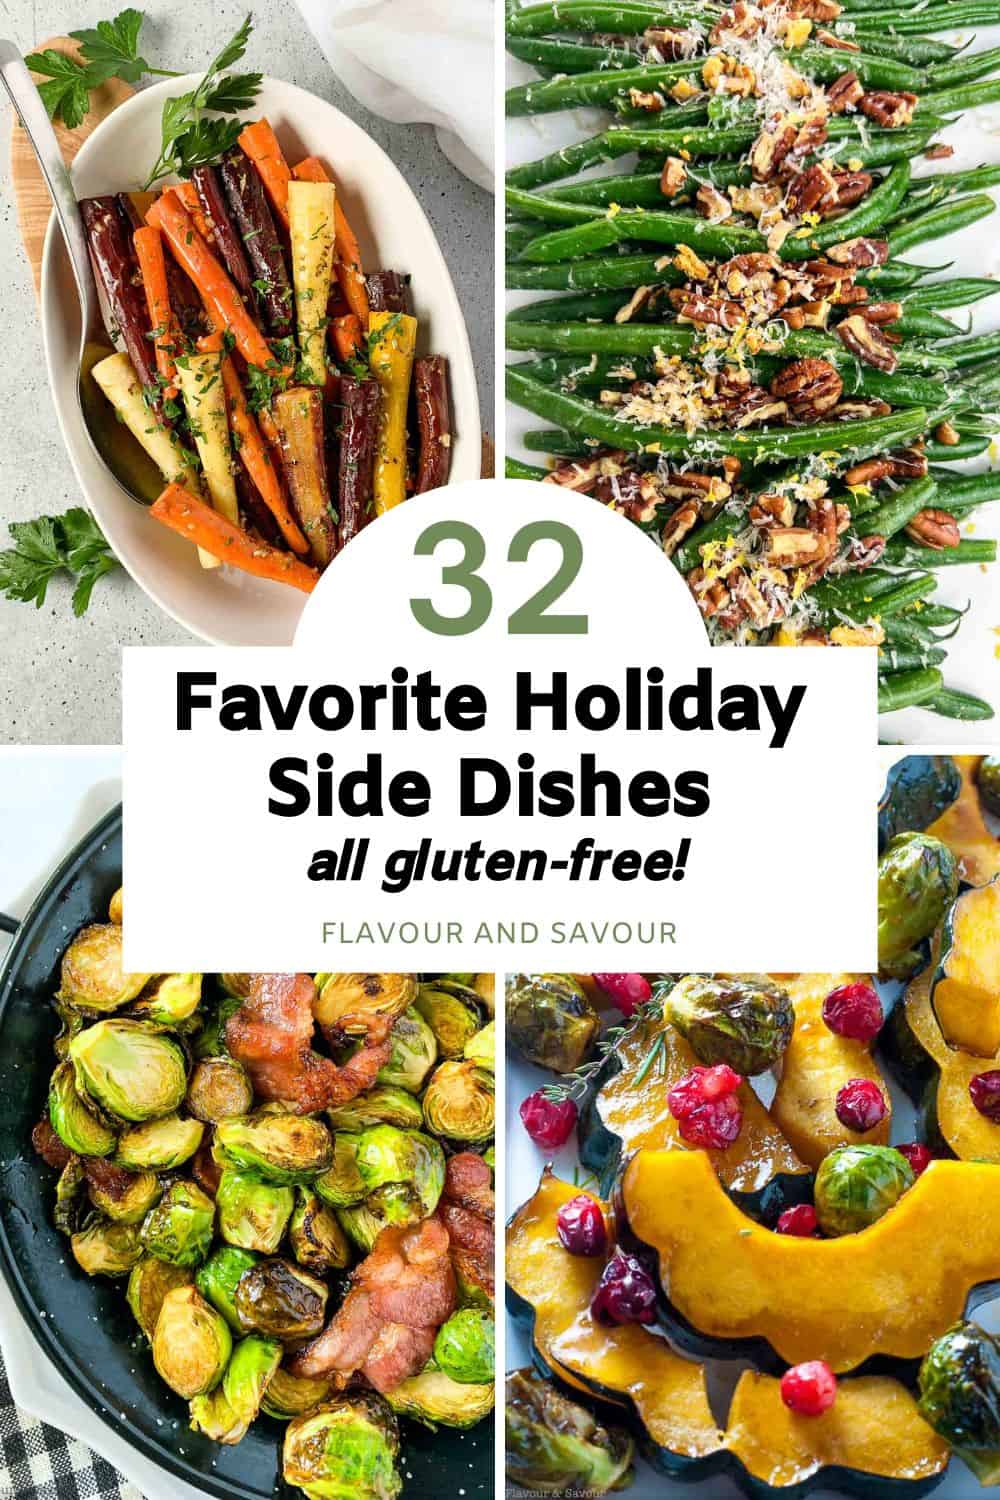 Image with text overlay for 32 gluten-free holiday side dish recipes.